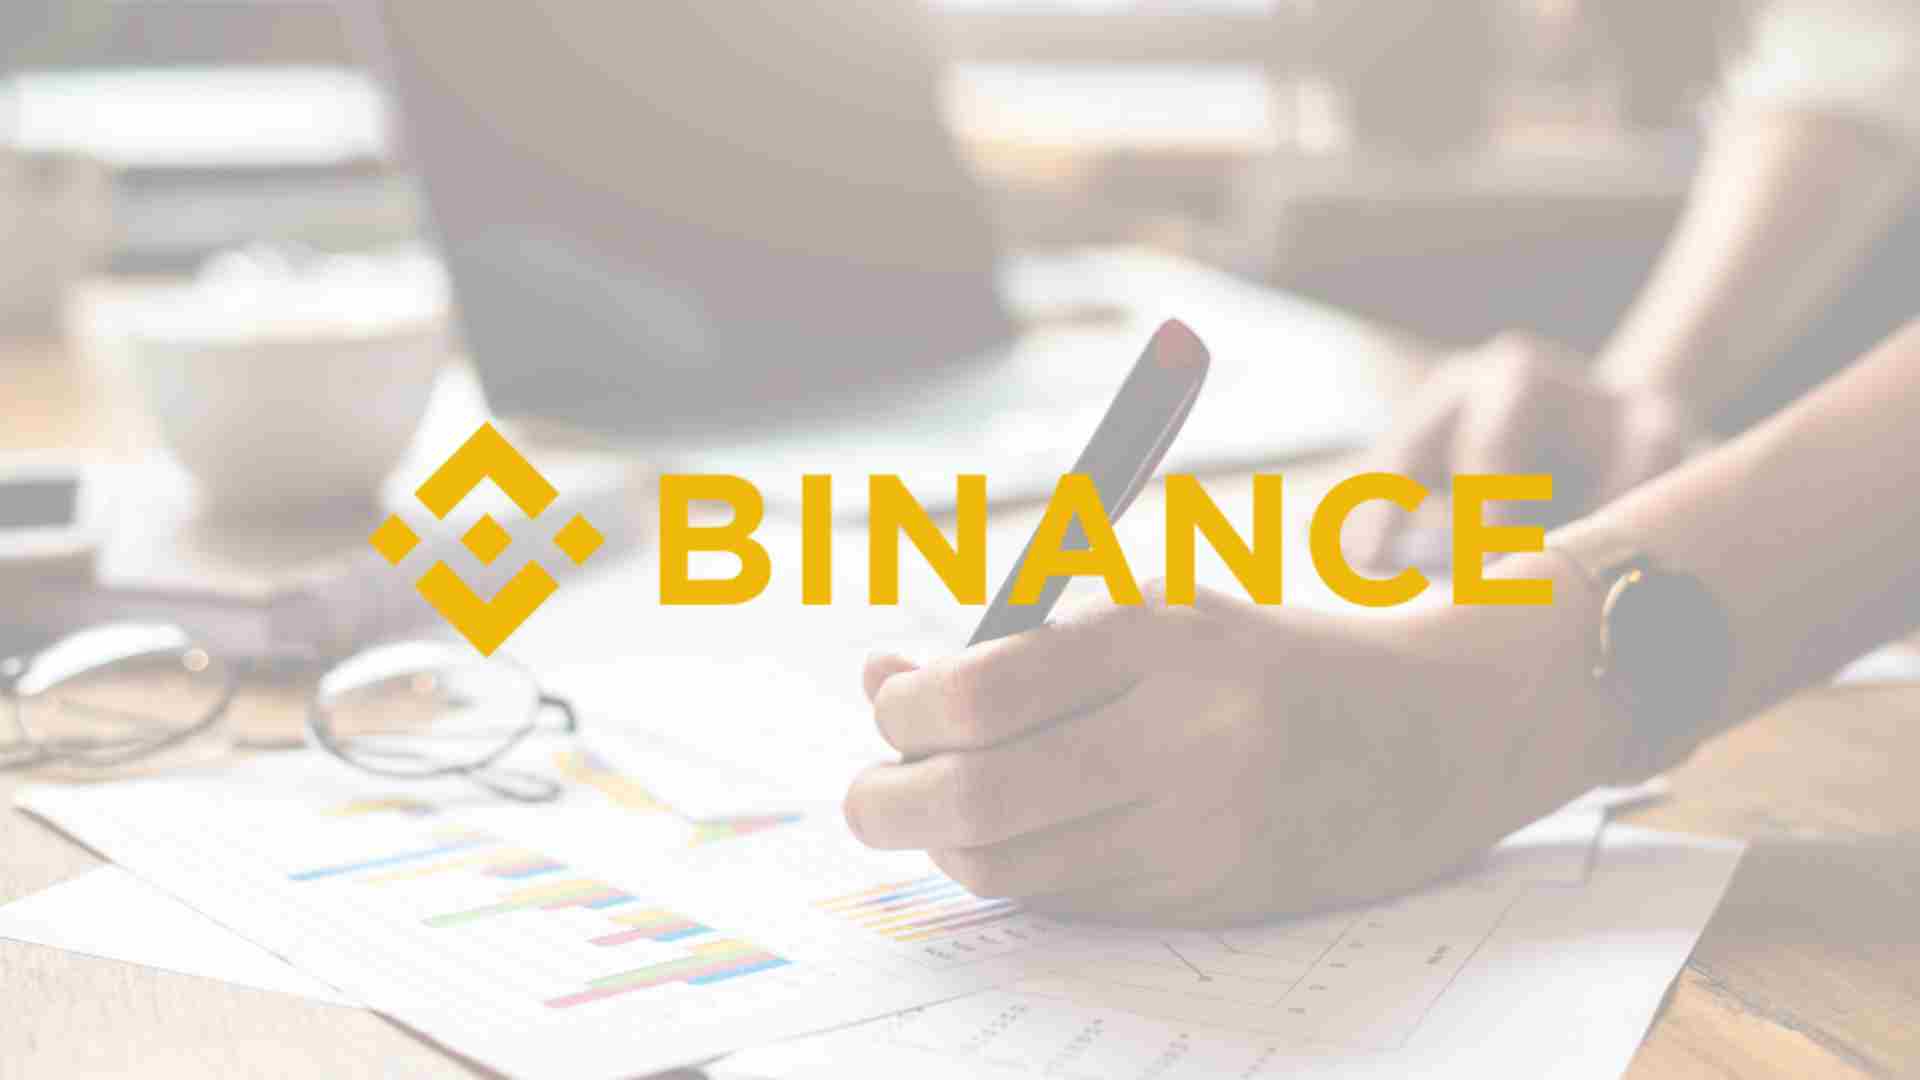 Binance Quarterly Report Highlights Major Infrastructure Investment